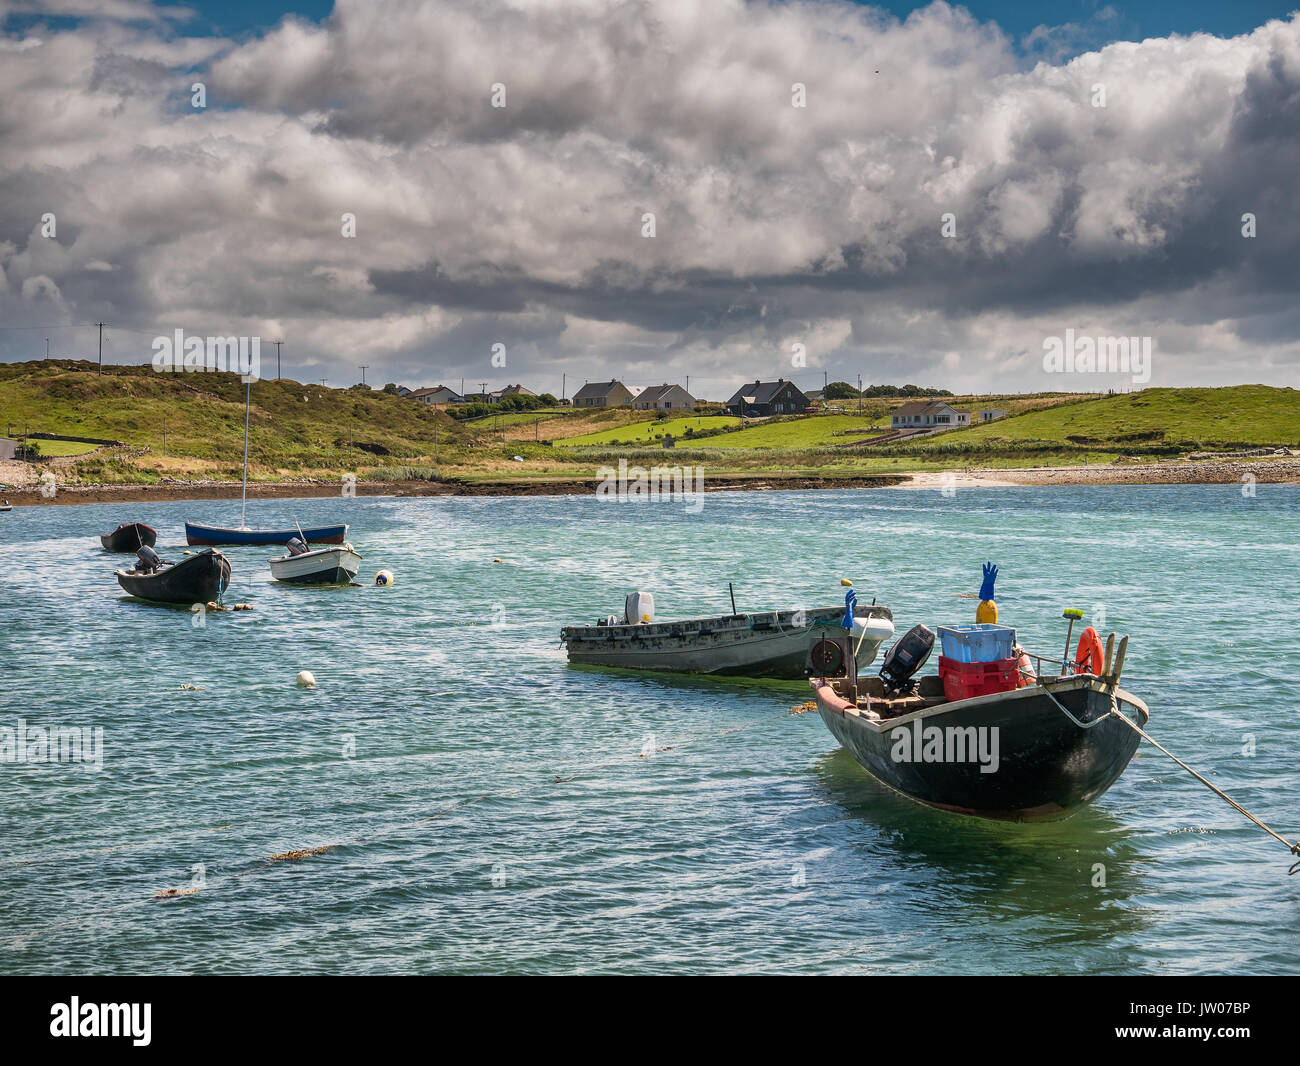 Traditional Irish fishing boats vessels in county Galway, near Letterfrack, Ireland Stock Photo